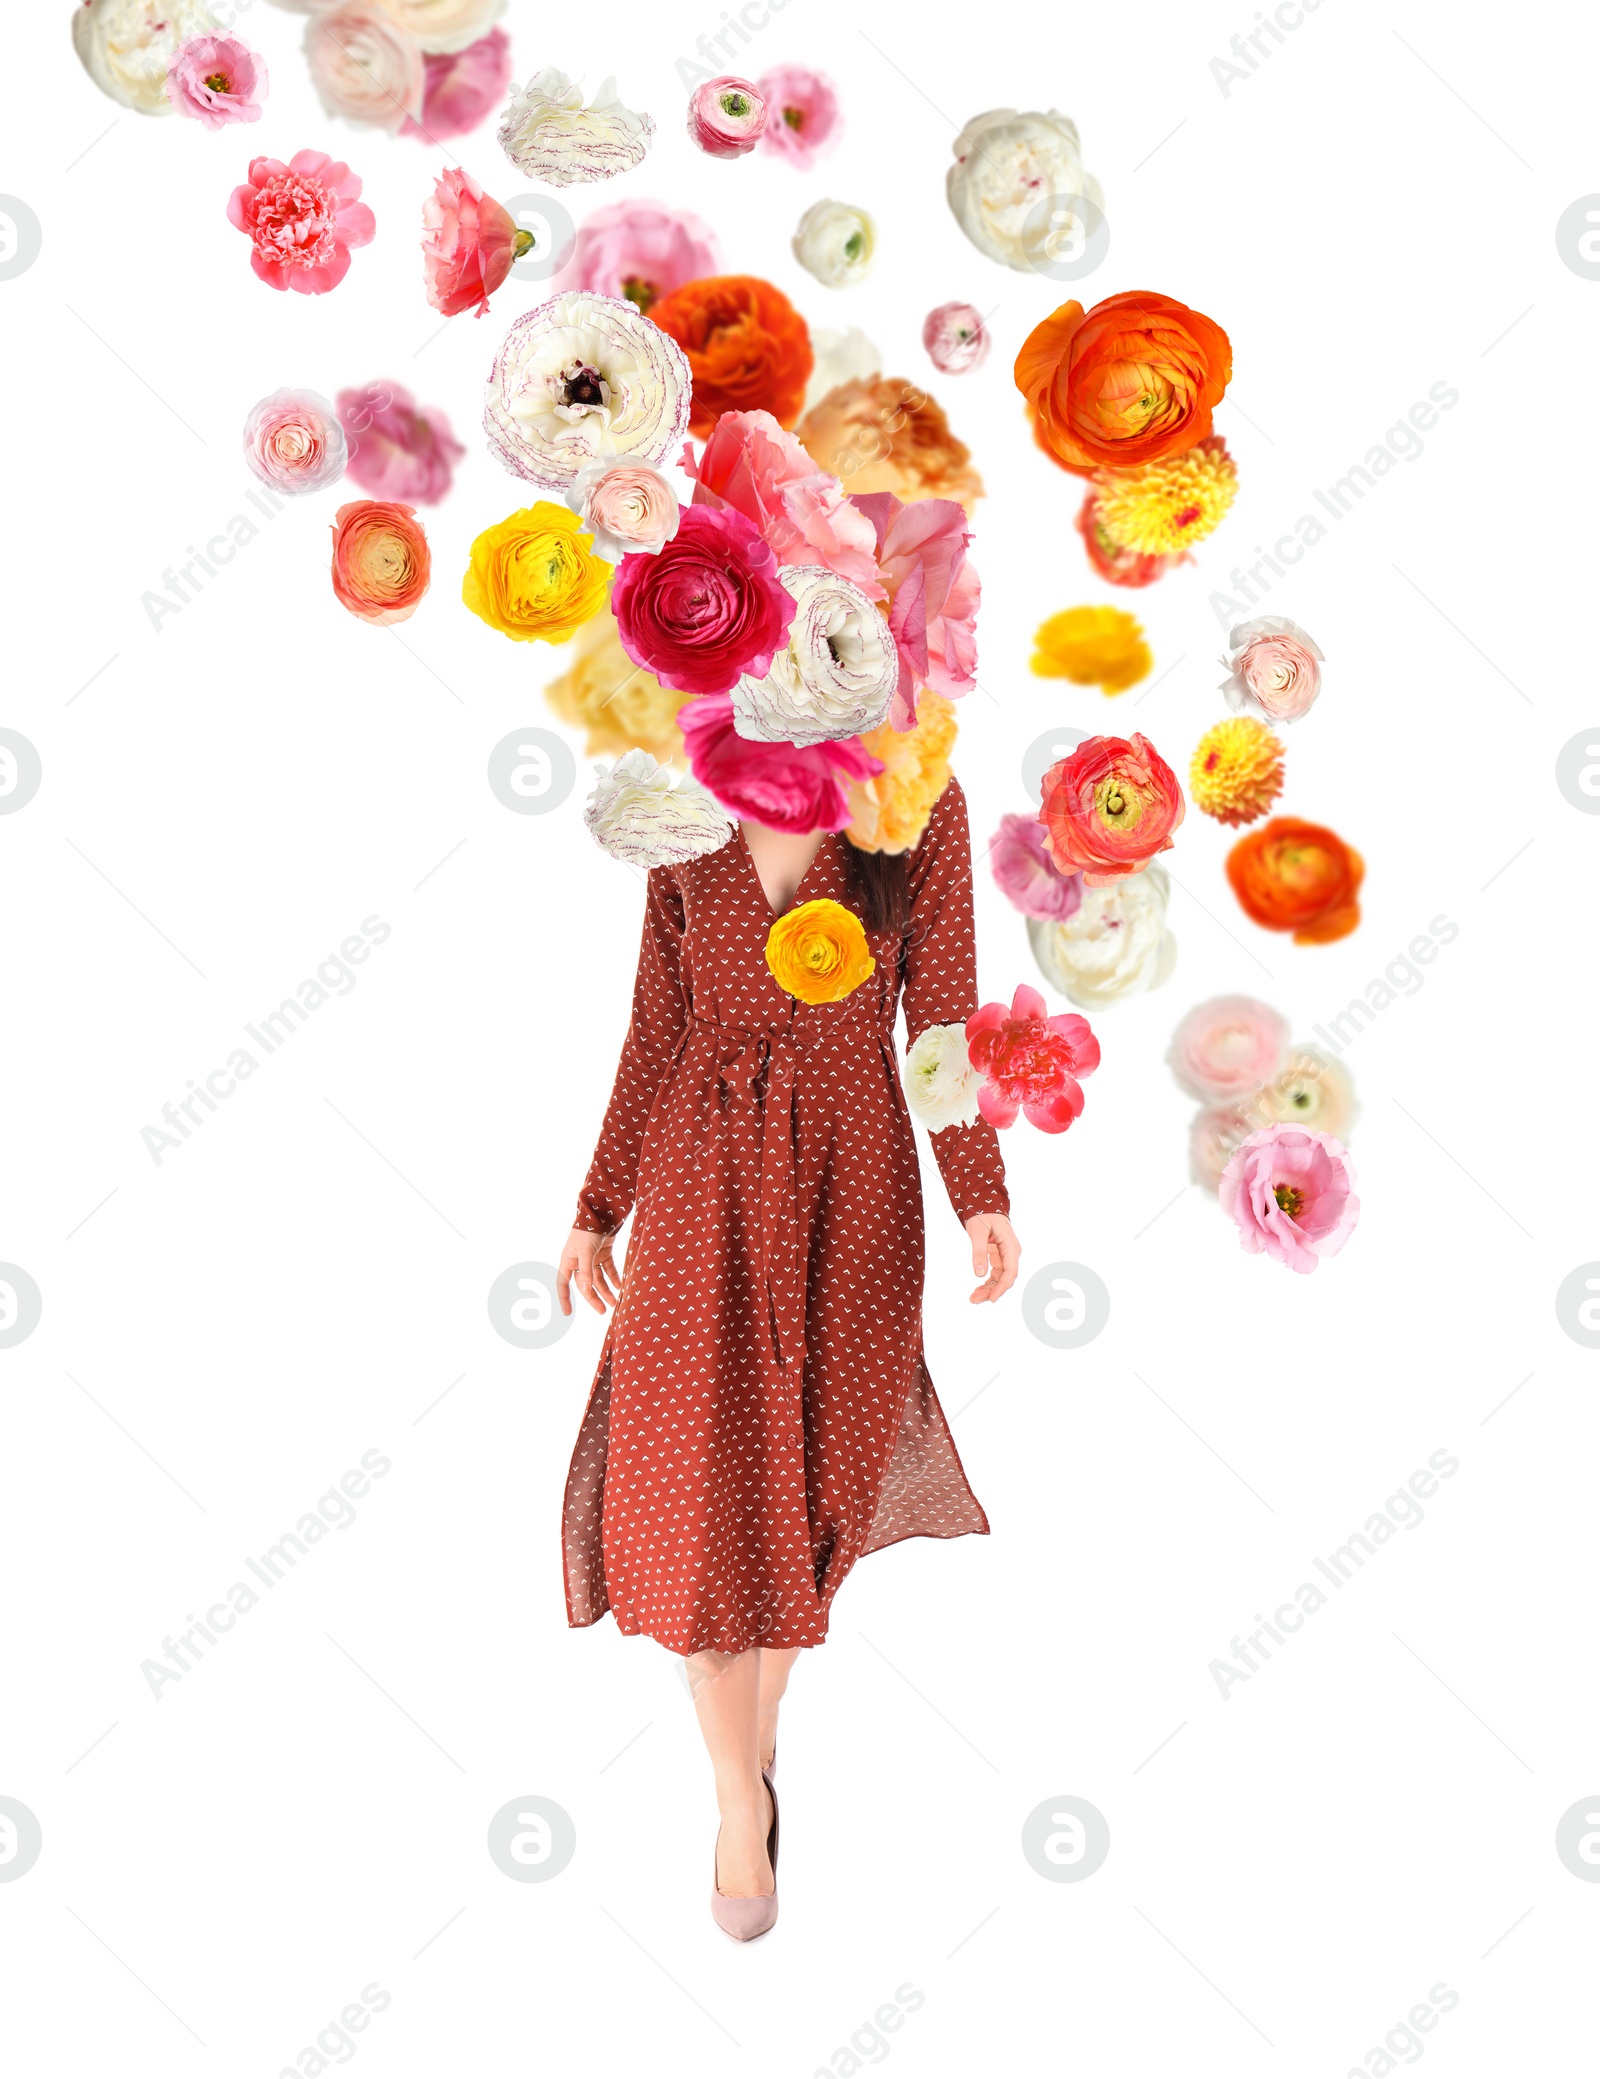 Image of Creative spring fashion composition. Walking girl and flowers splash